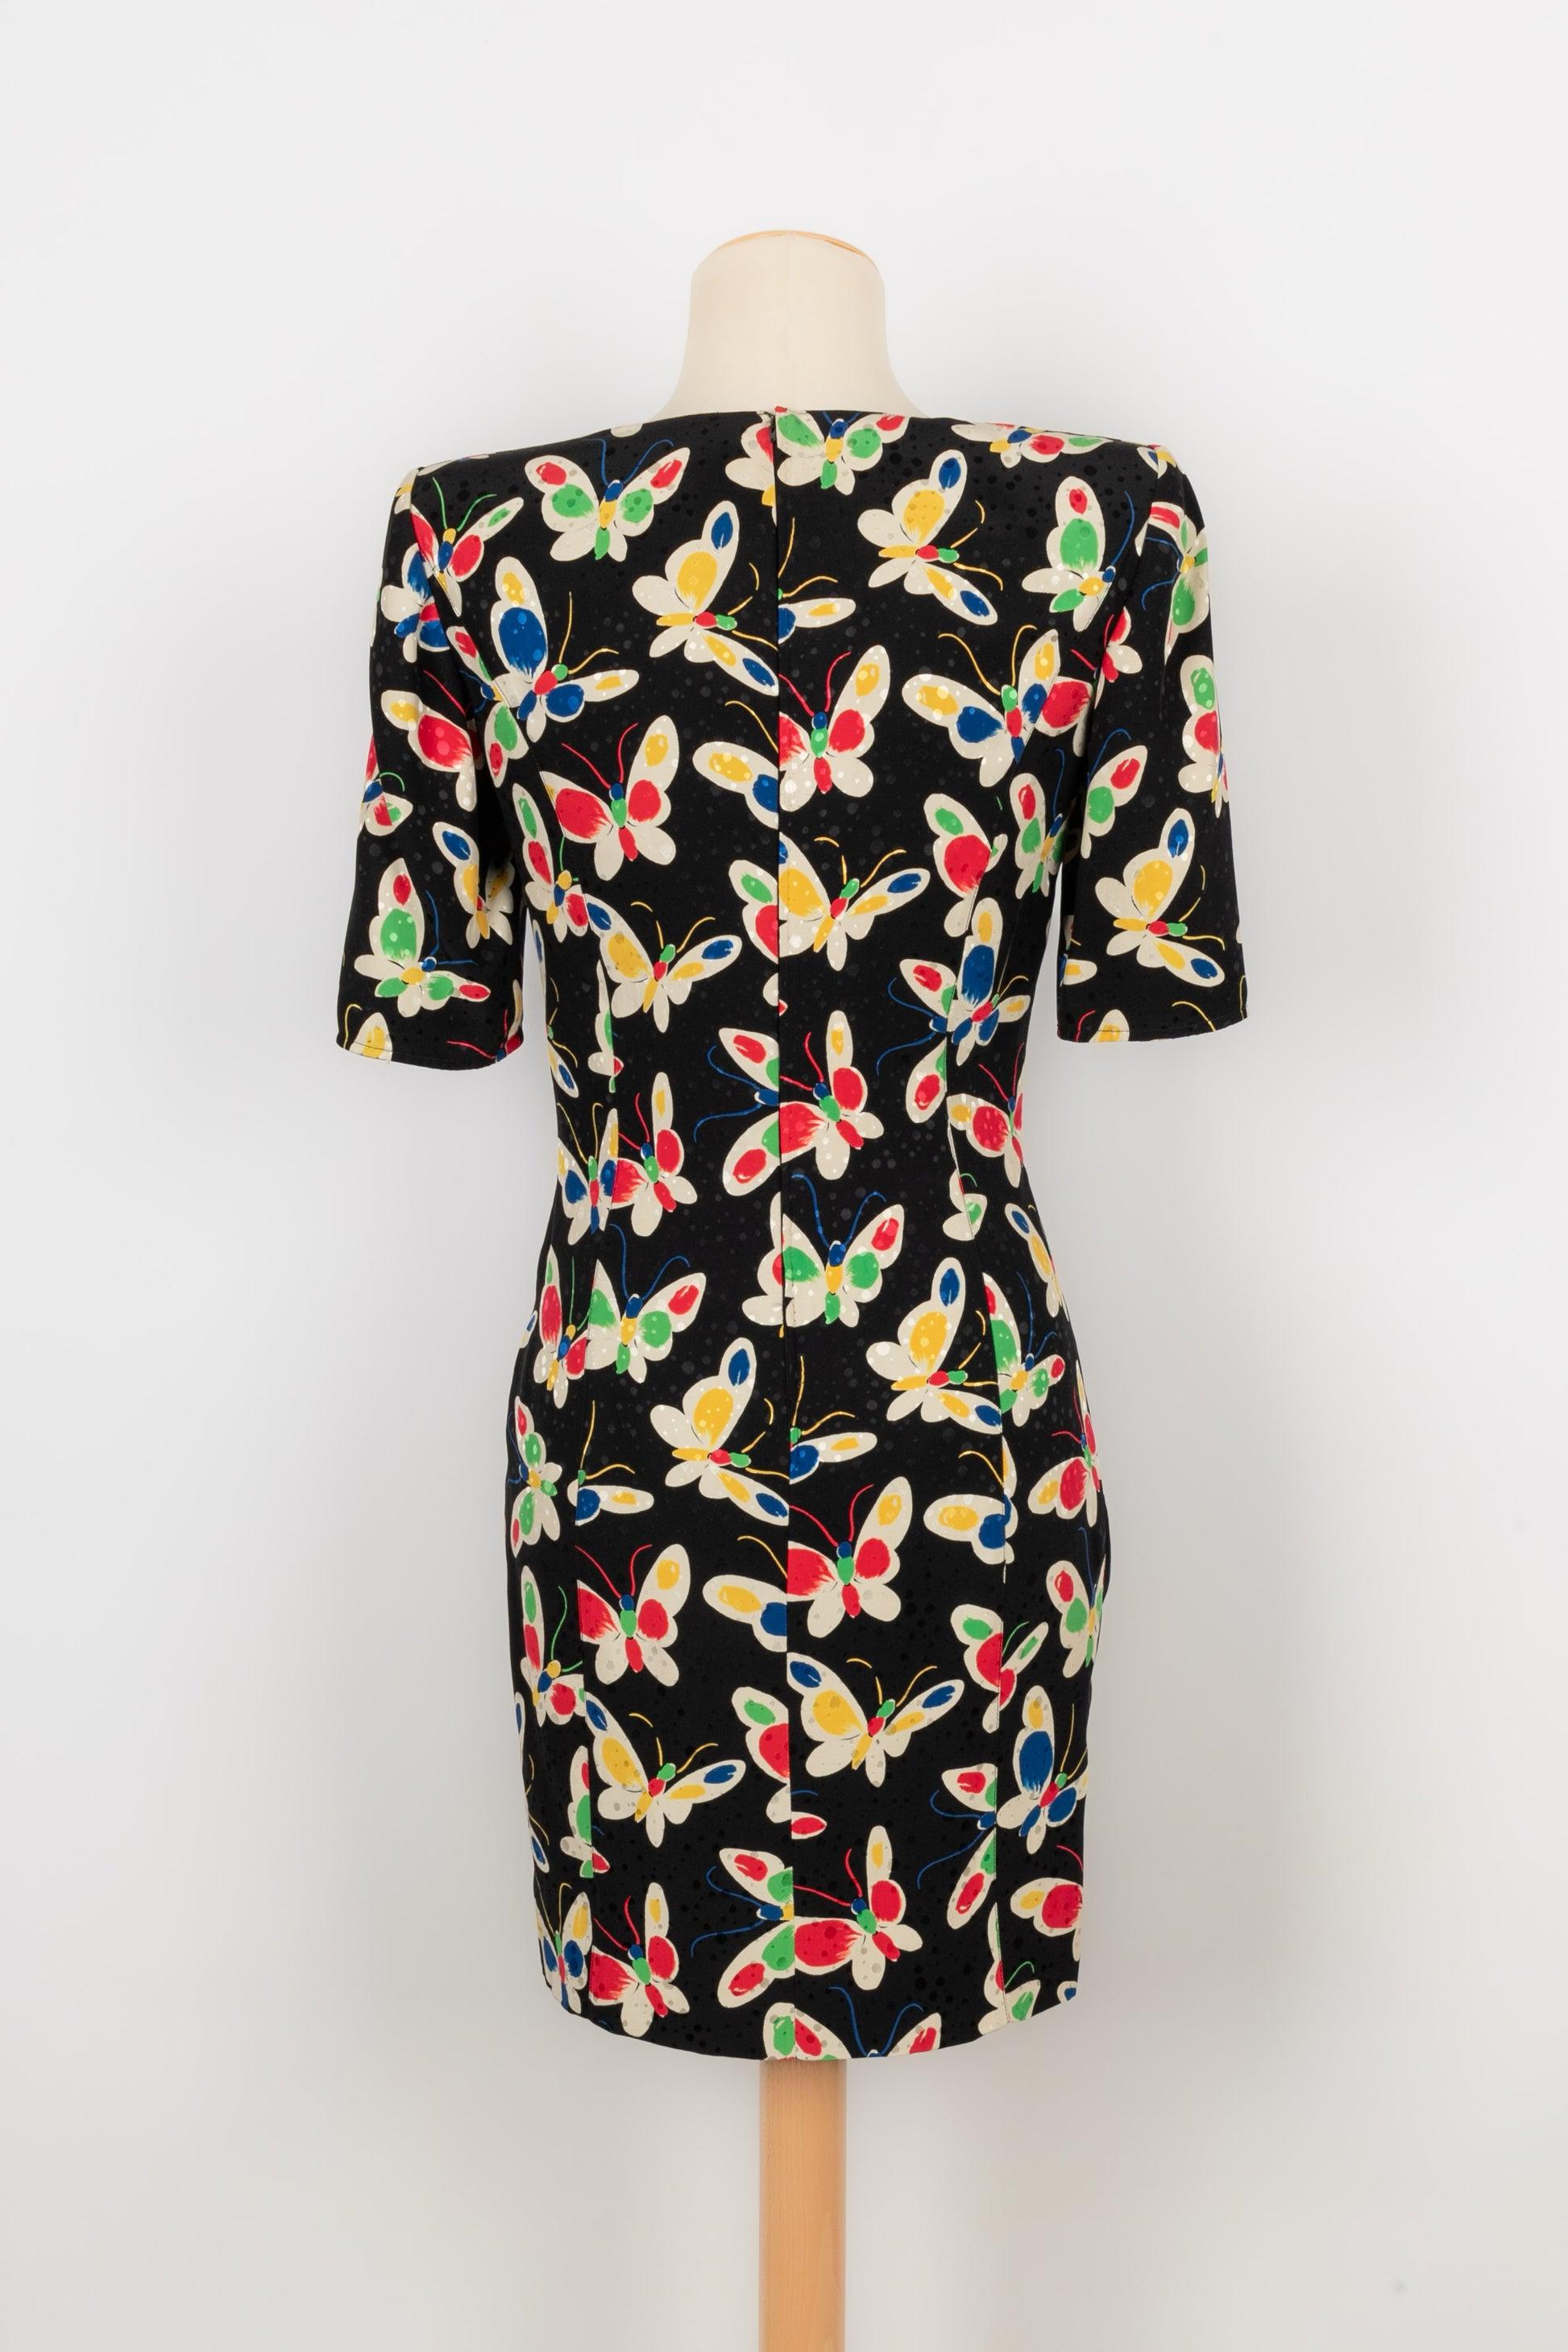 Ungaro Black Silk Short Dress Printed with Multicolored Flowers In Excellent Condition For Sale In SAINT-OUEN-SUR-SEINE, FR